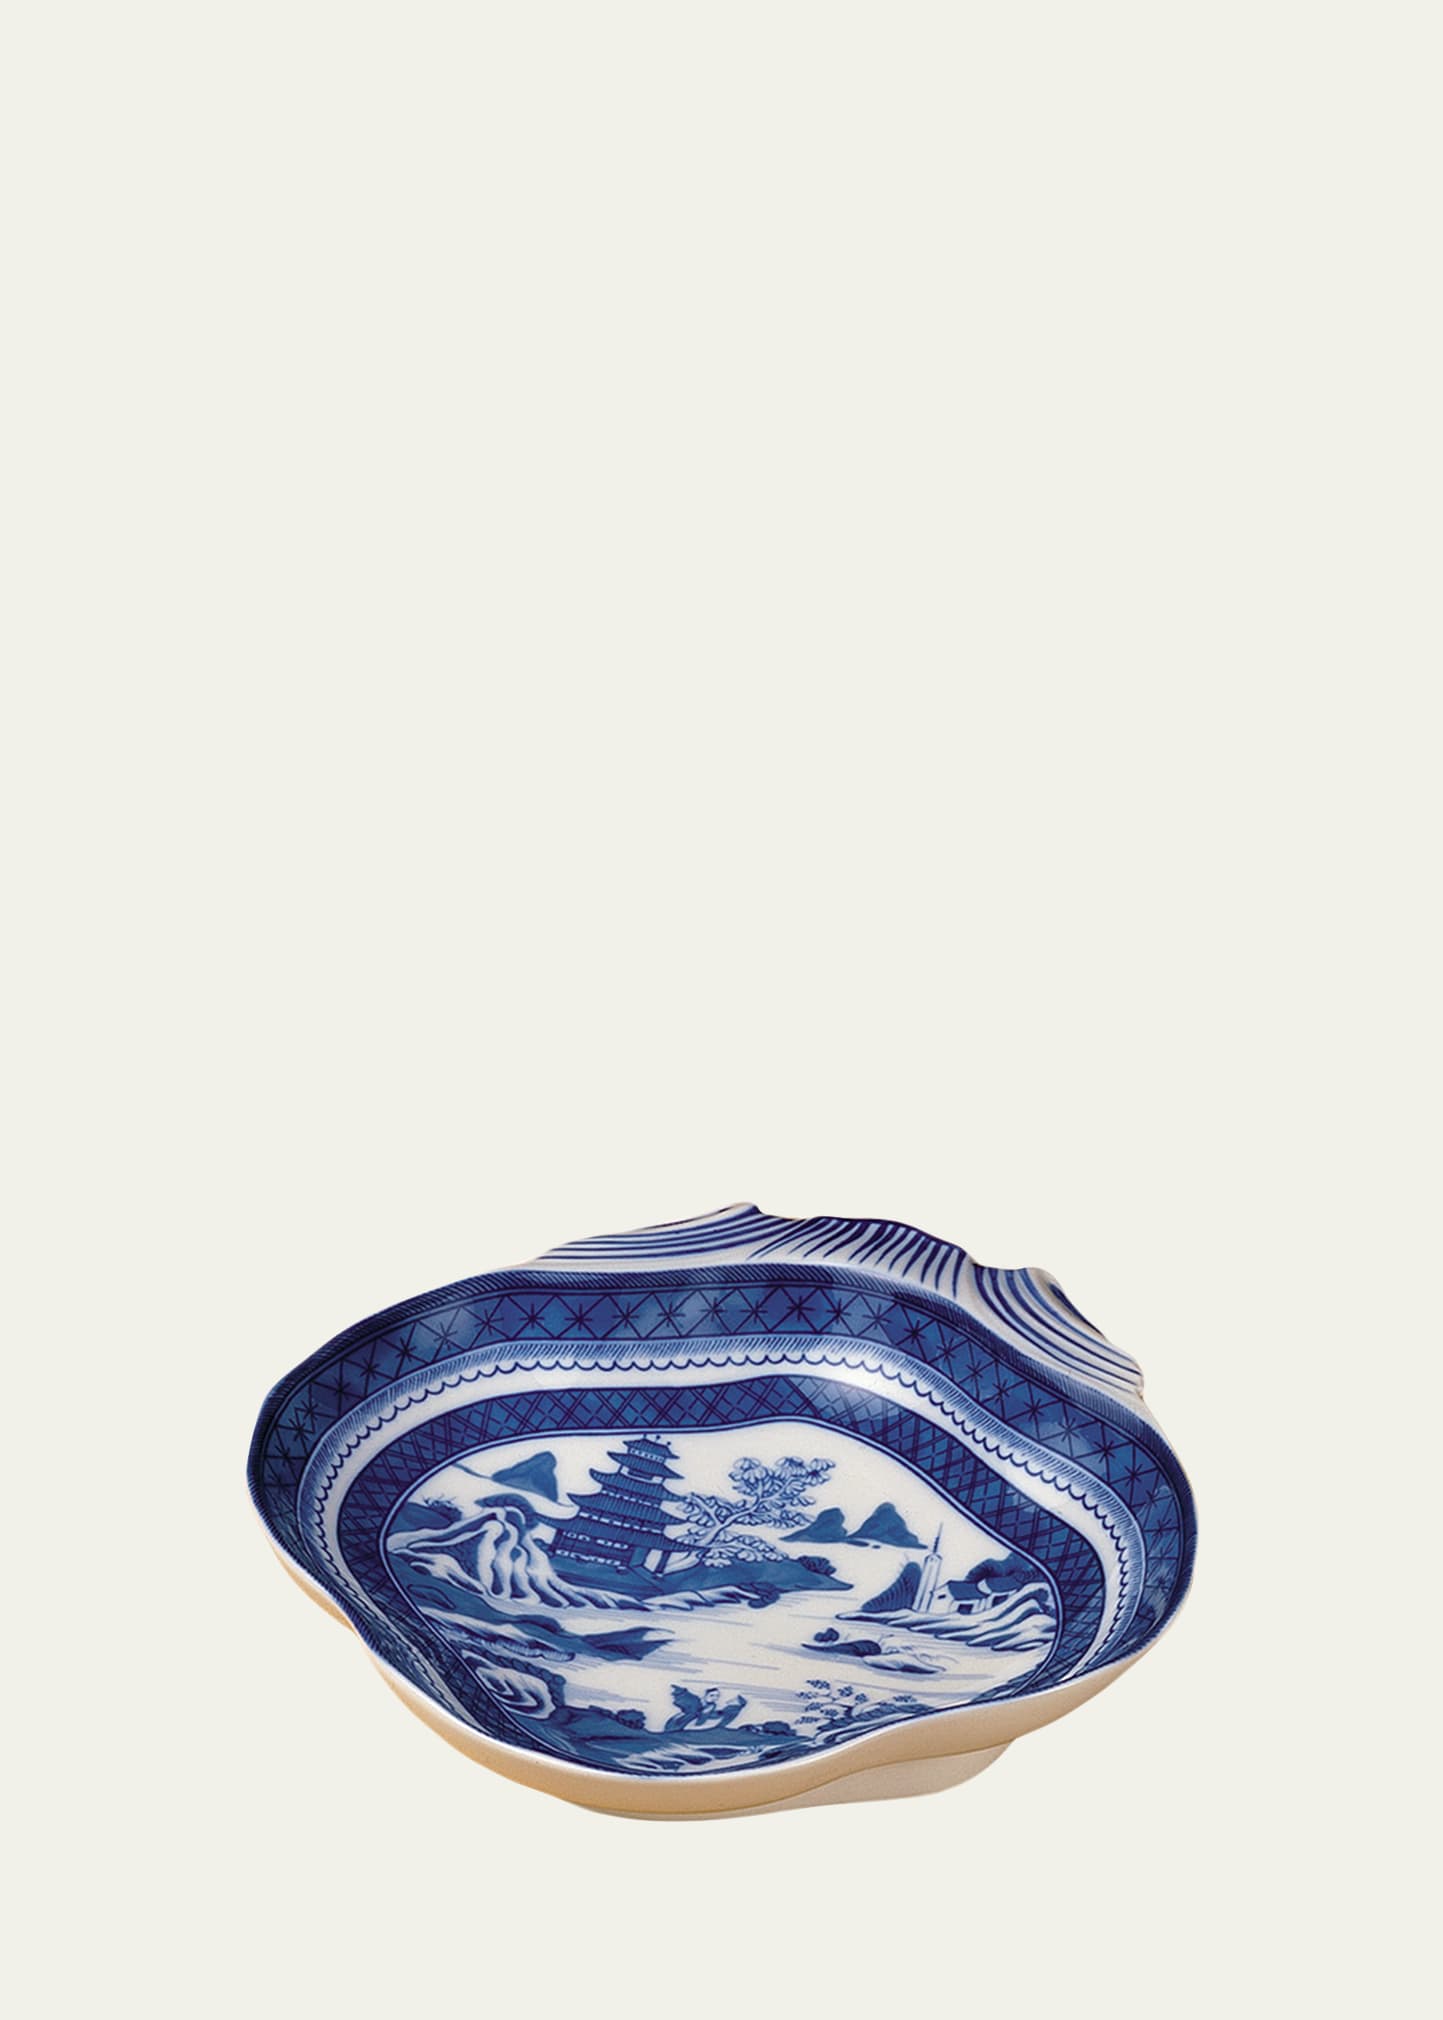 Mottahedeh Blue Canton Shell-shaped Serving Dish